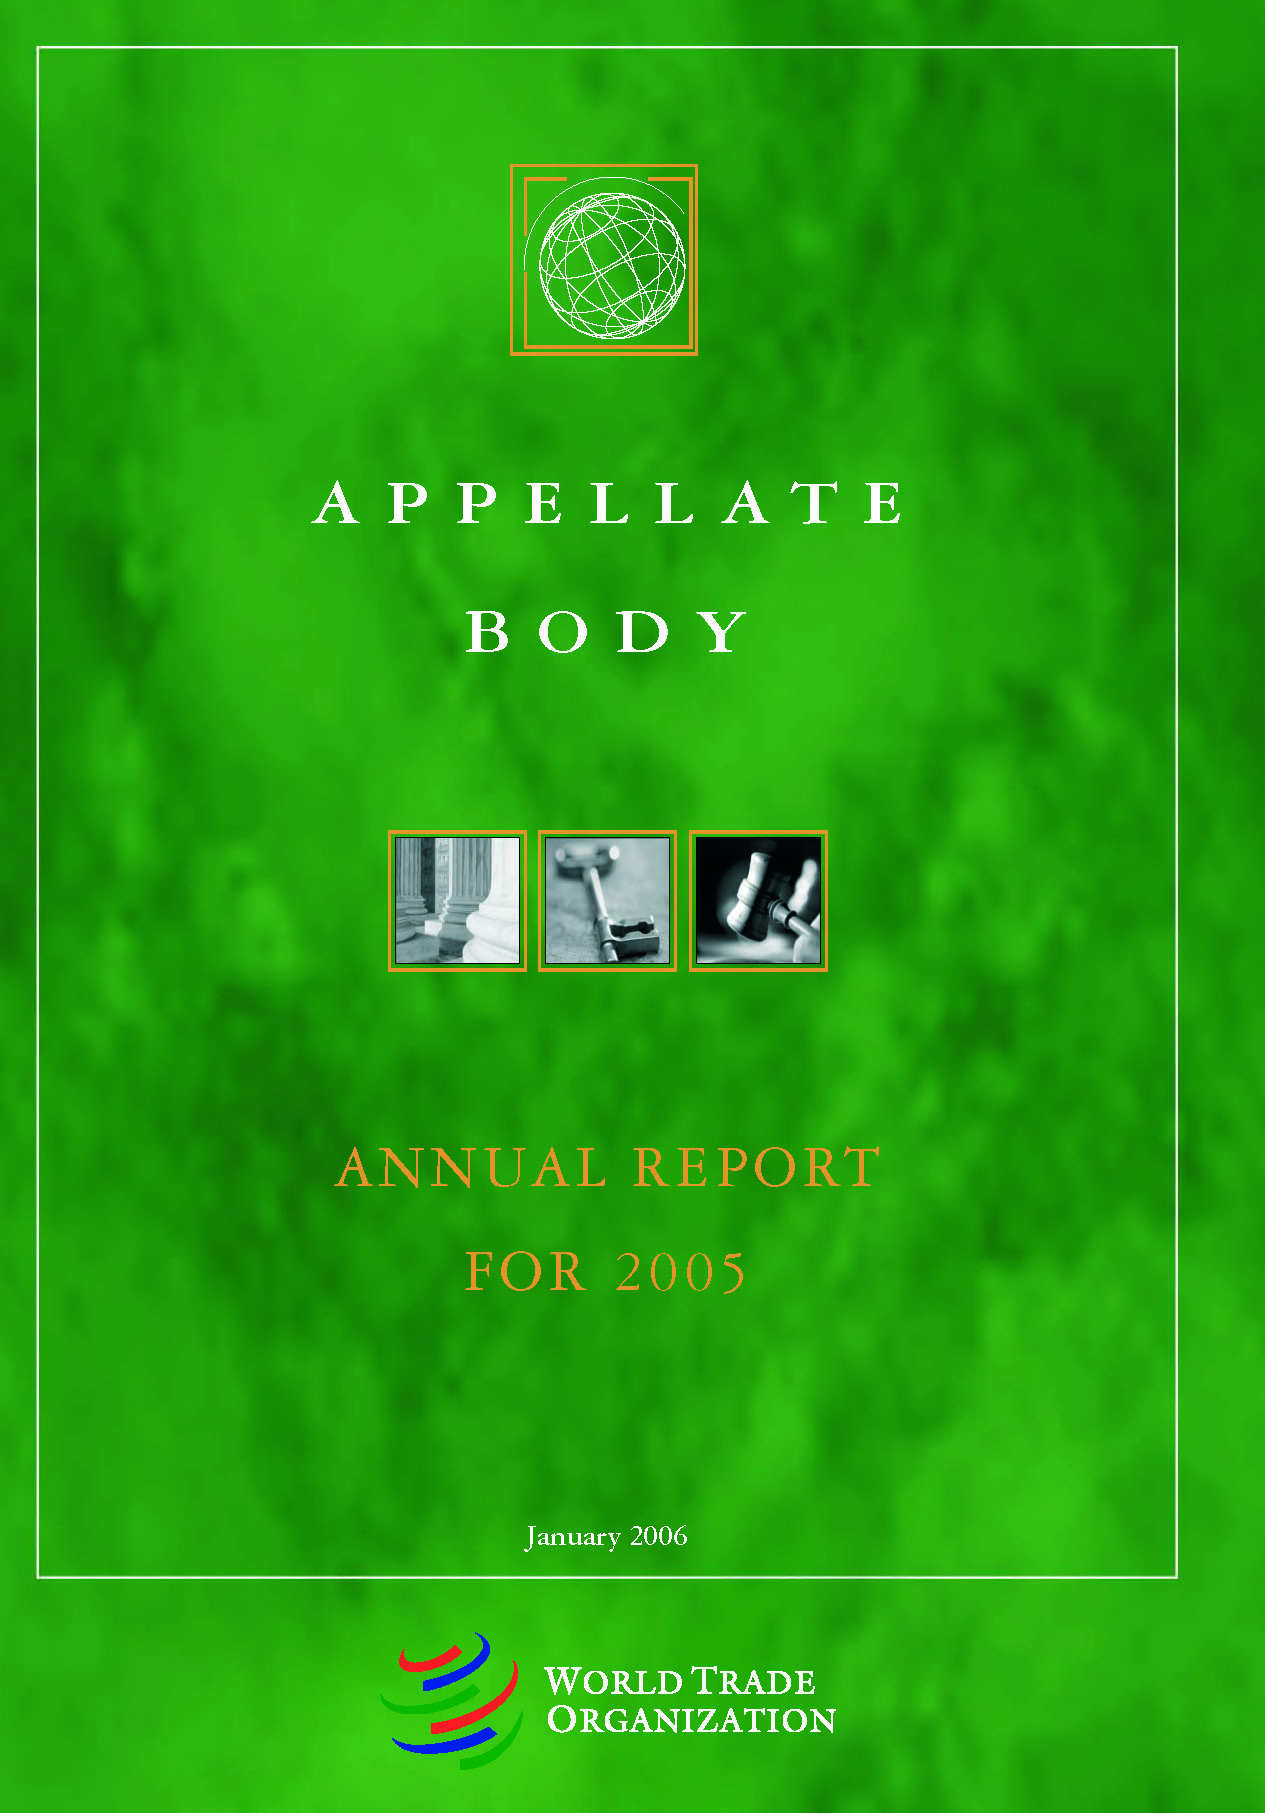 image of Appellate Body annual report for 2005